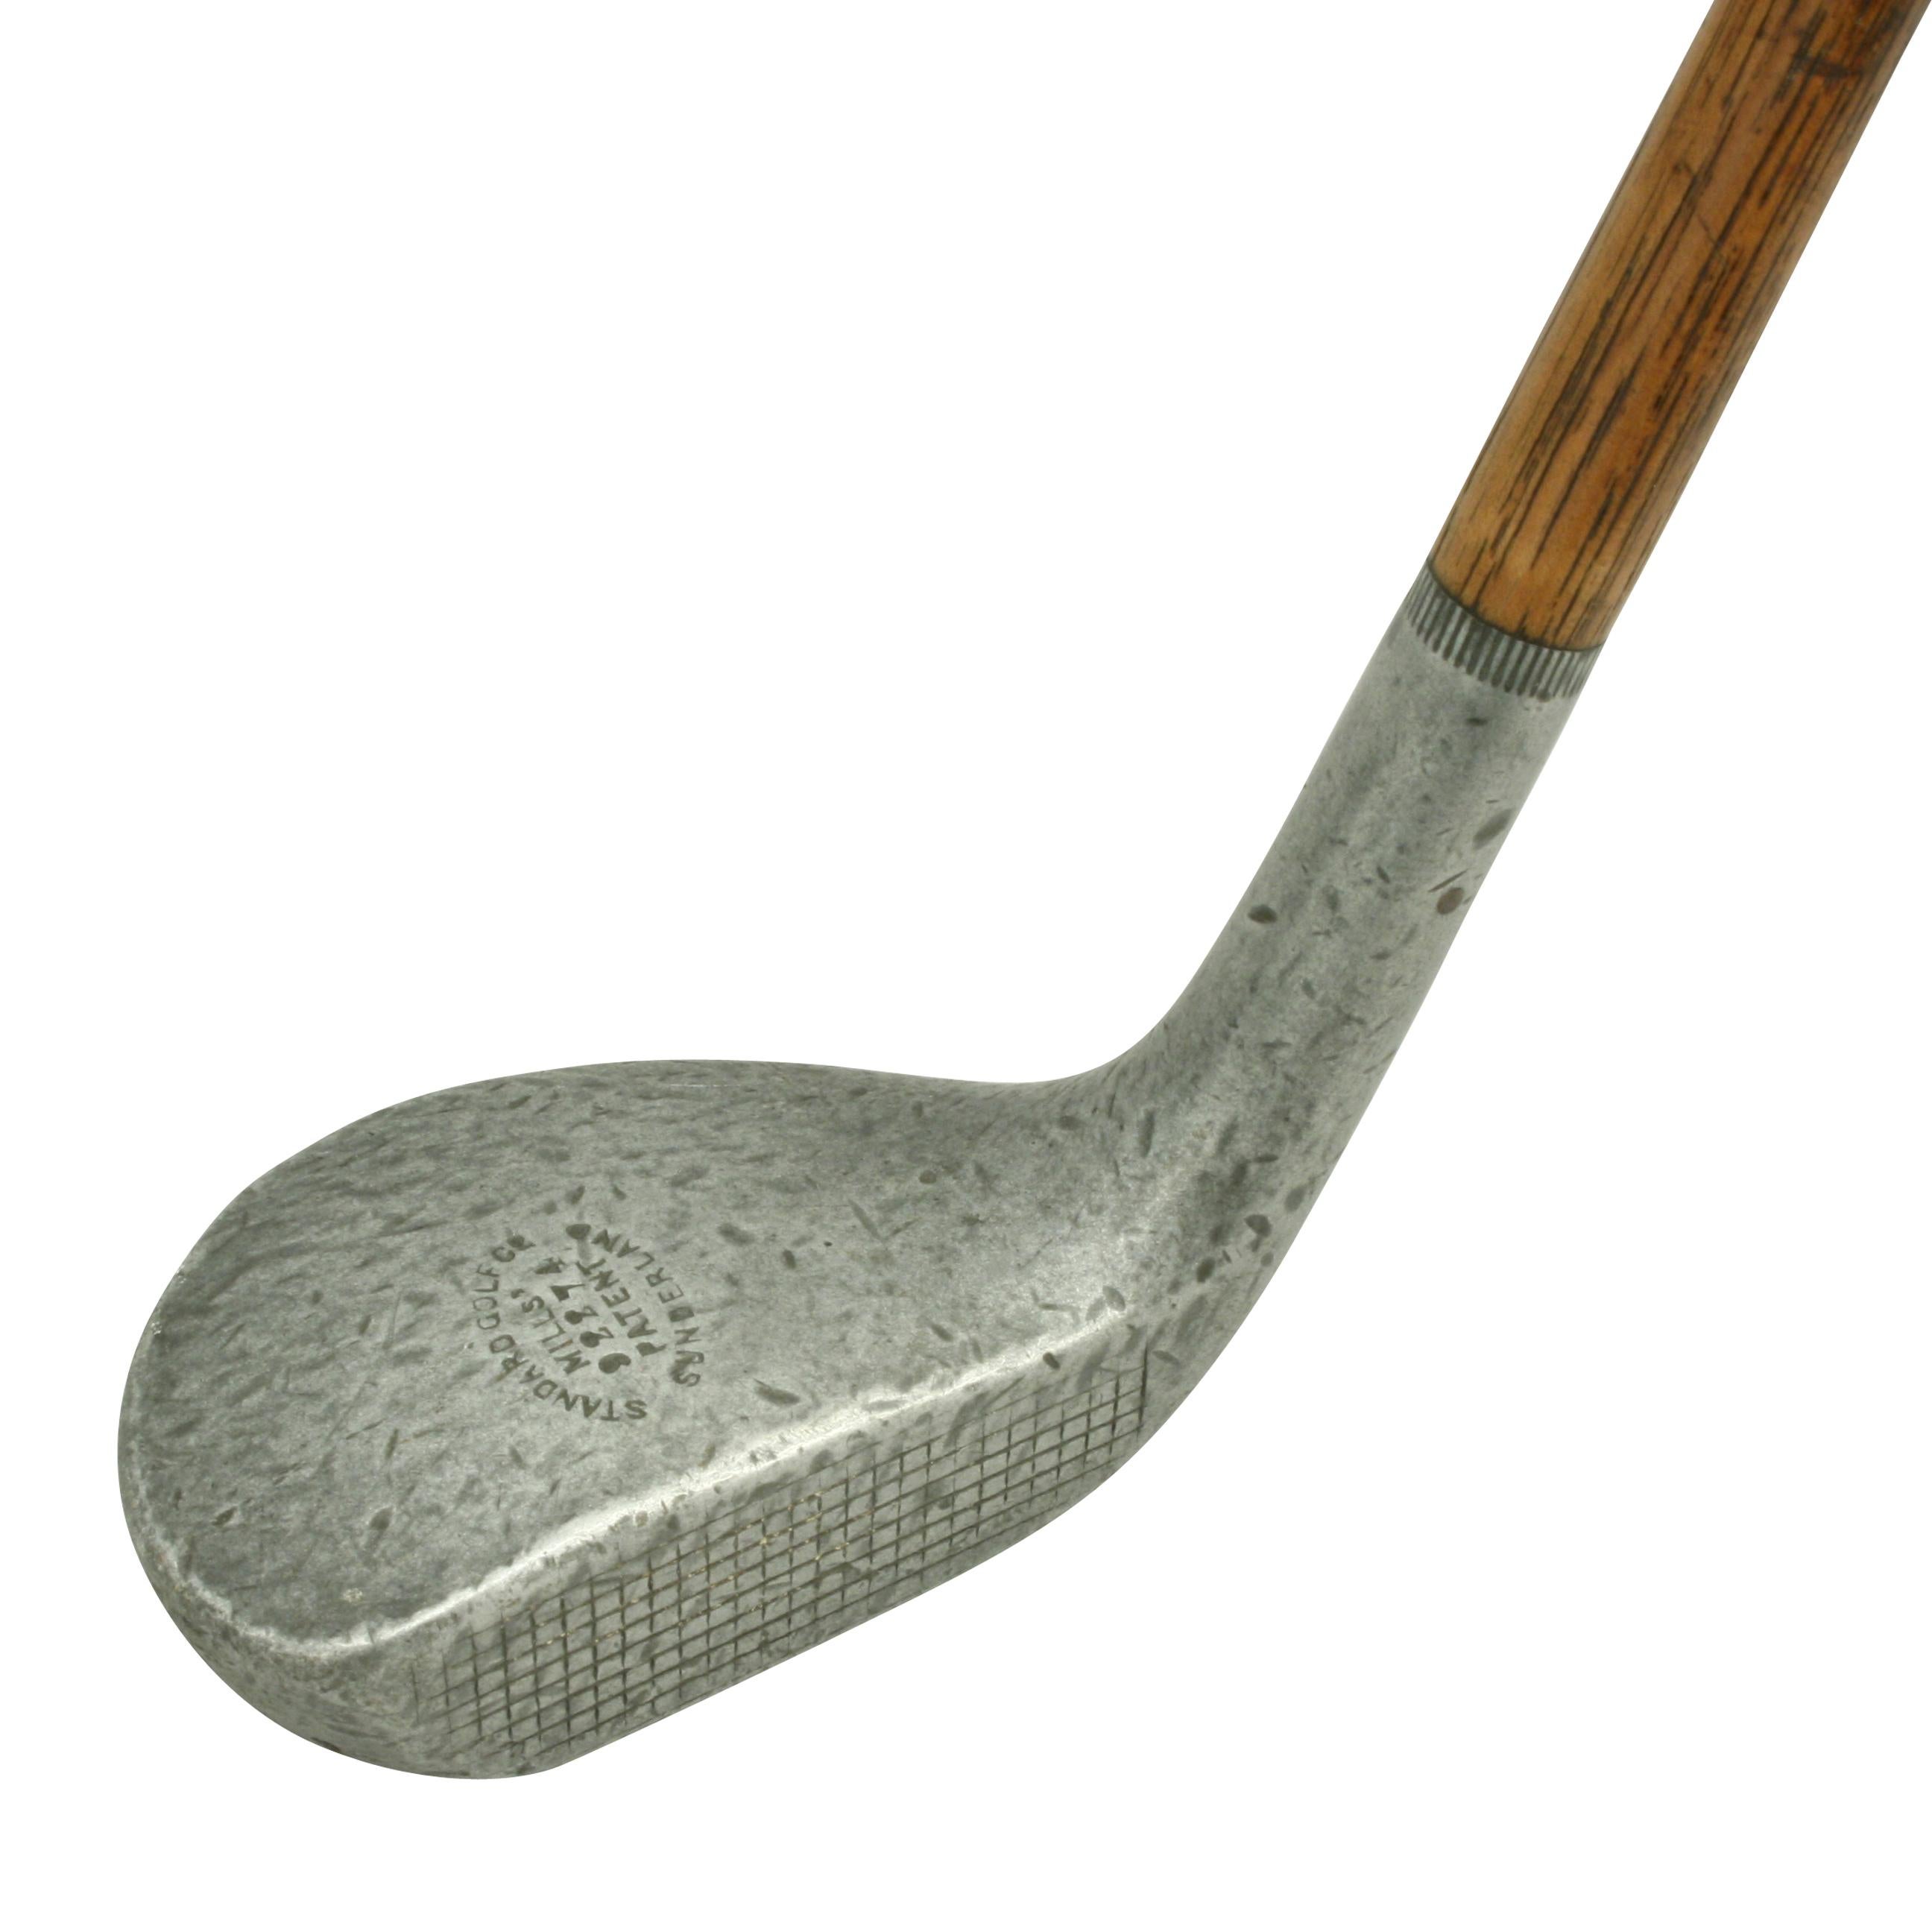 Antique Hickory Golf Club, Mills Putter.
A good example of the very popular aluminium Braid Mills putter by the Standard Golf Co. The top of the head is stamped 'STANDARD GOLF Co., MILLS, 92274, PATENT, SUNDERLAND', whilst the bottom is stamped